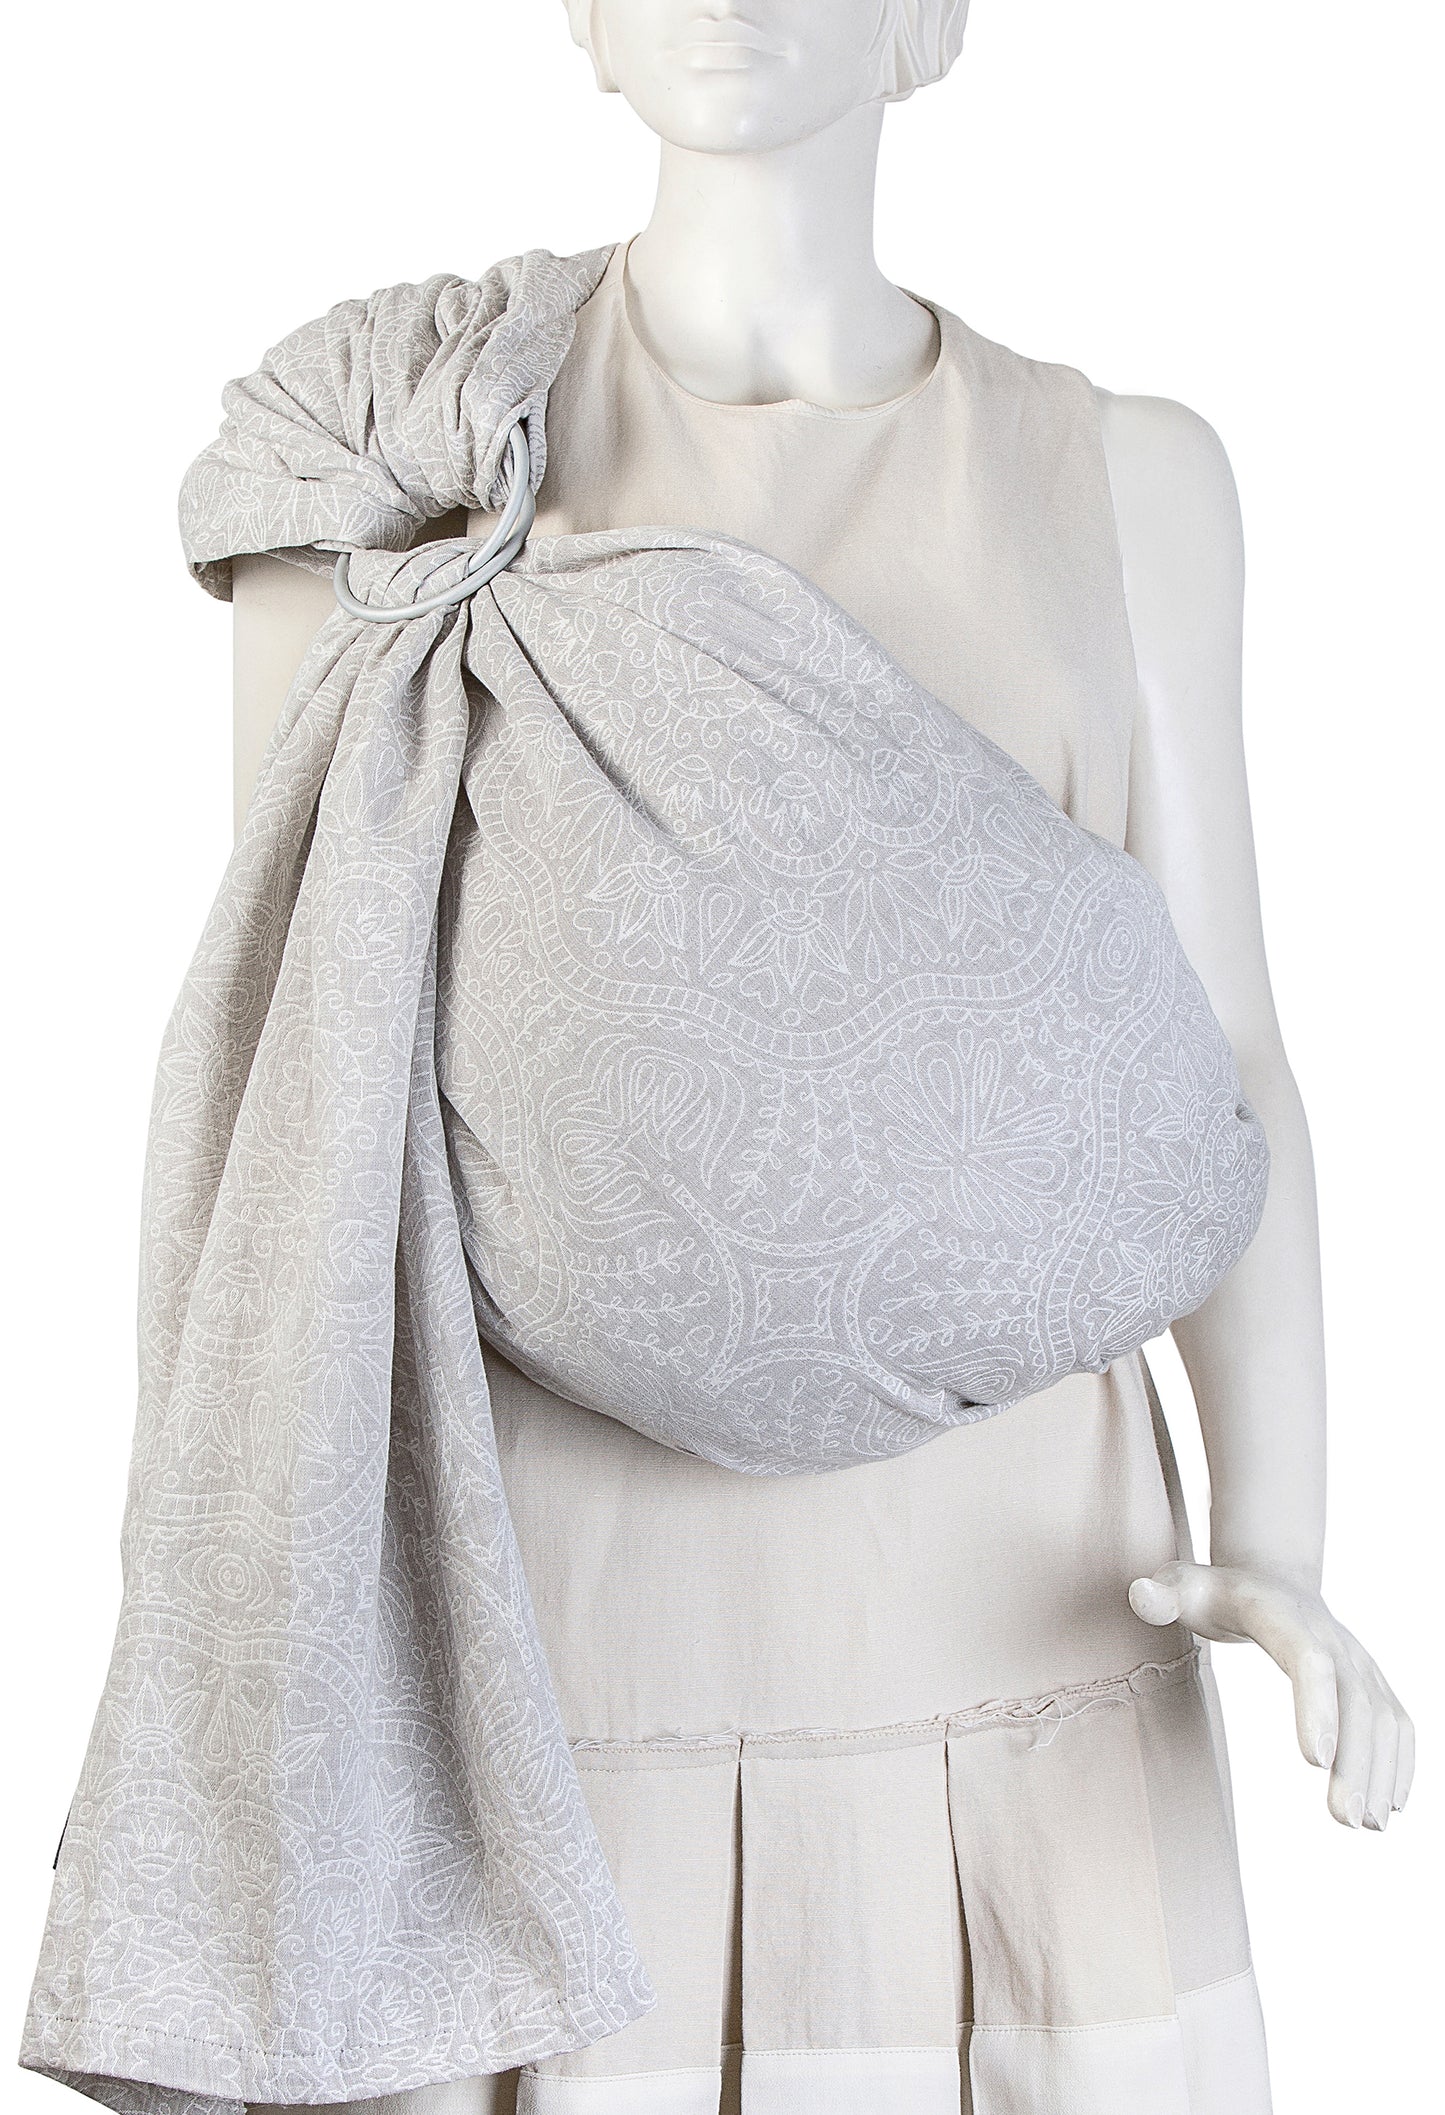 Beige Grey Floral Design Baby Sling and Ring Sling 100% Cotton Muslin baby Carrier Suitable from Newborn to Toddler